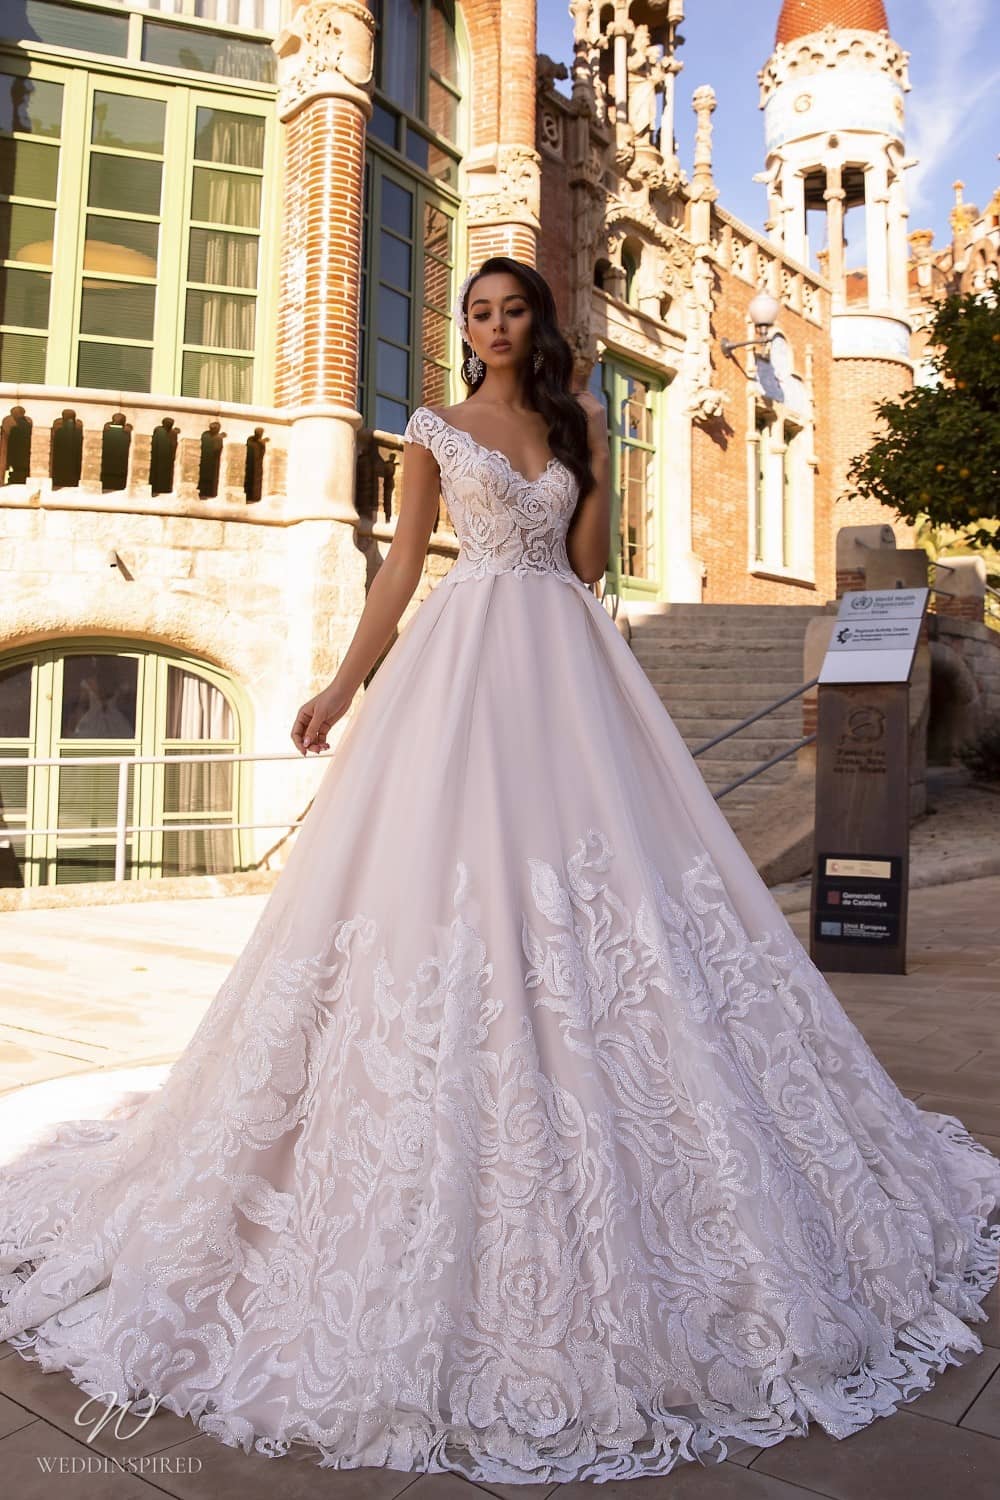 maks mariano wedding dresses off the shoulder blush princess ball gown